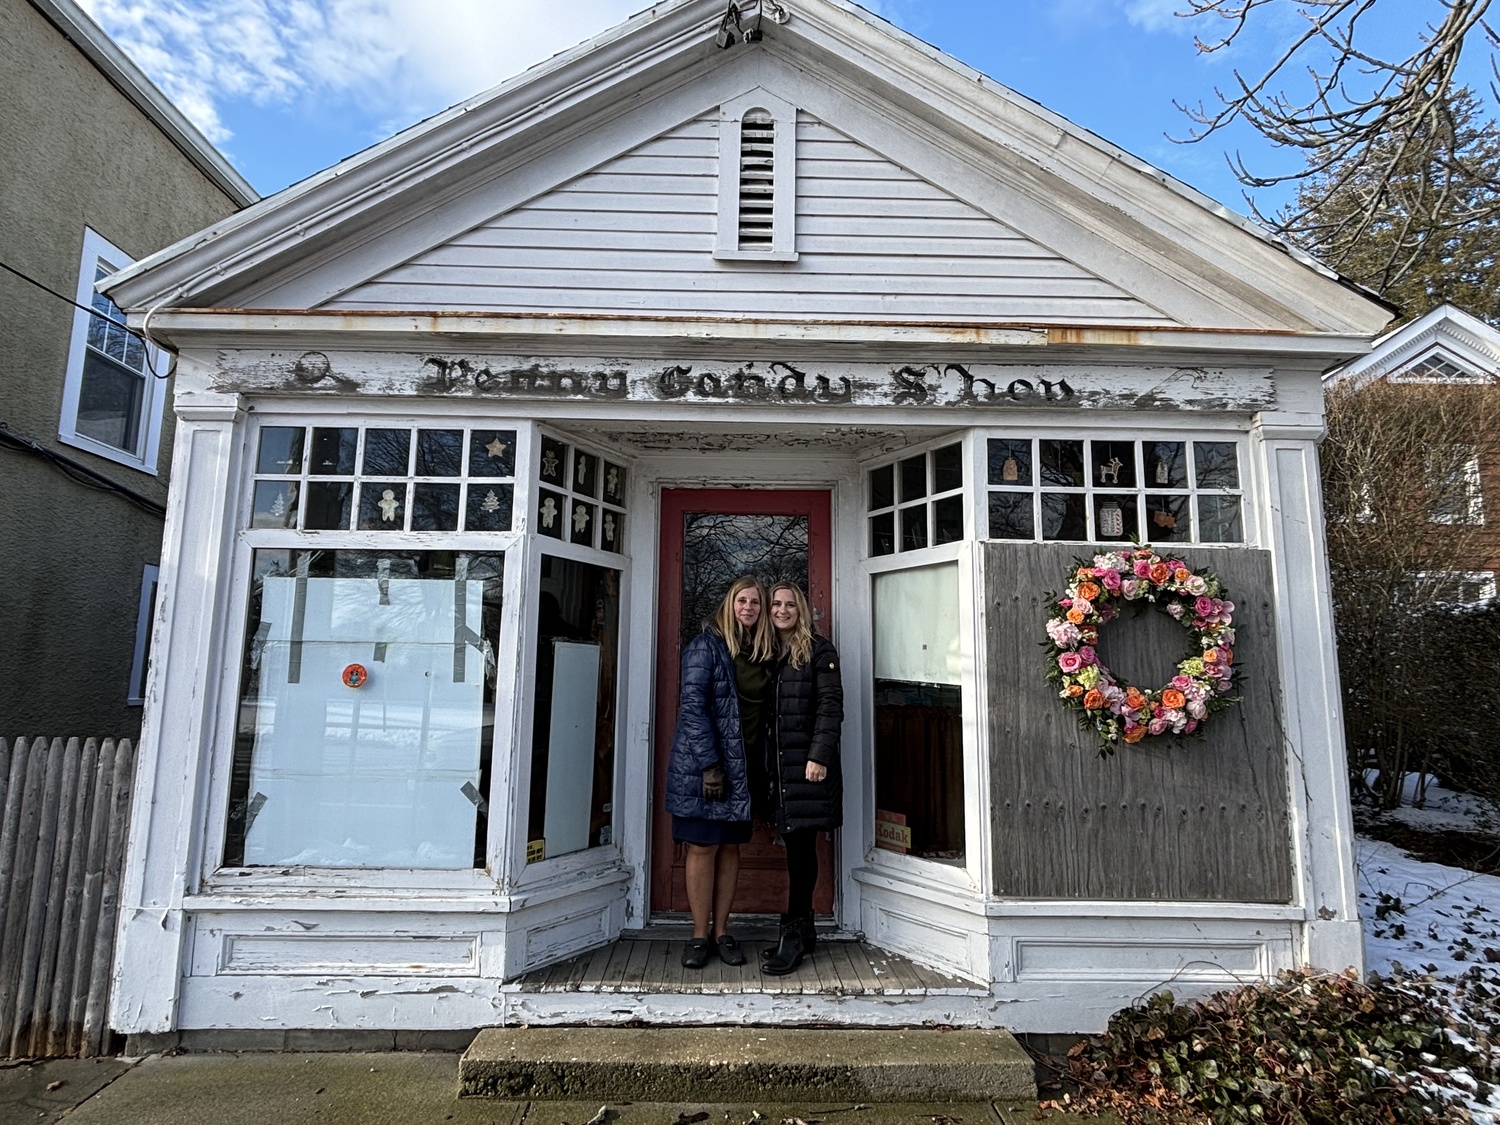 Barbara Wilson and her daughter, Madison, outside the Penny Candy Shop in Water Mill earlier this month. COURTESY BARBARA WILSON